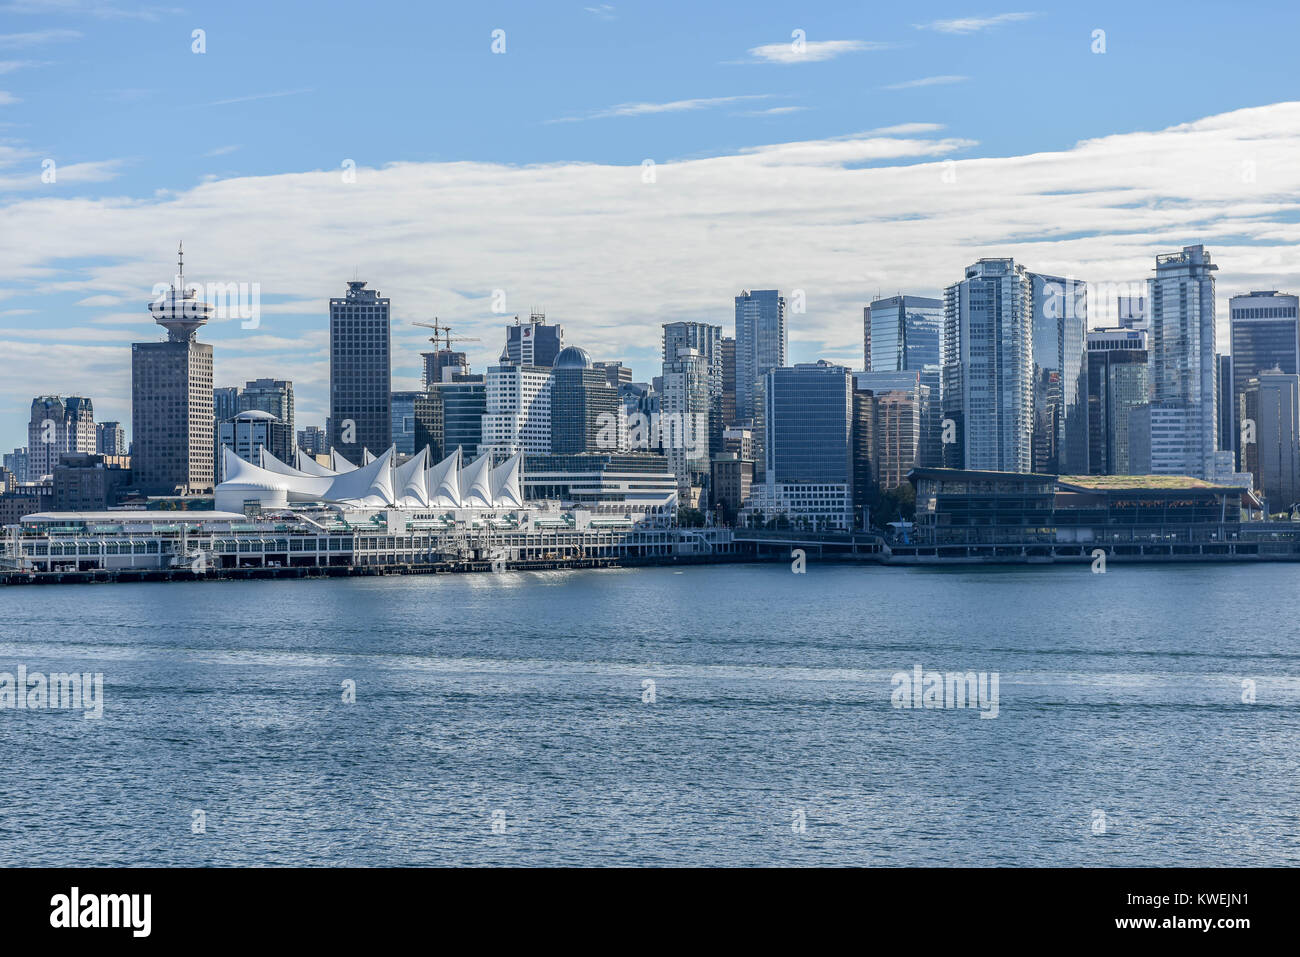 Port of Vancouver British Columbia in summer on a sunny day - Canada Place w/ a sea plane - seaplane - ships, boats and Modern Vancouver City Stock Photo